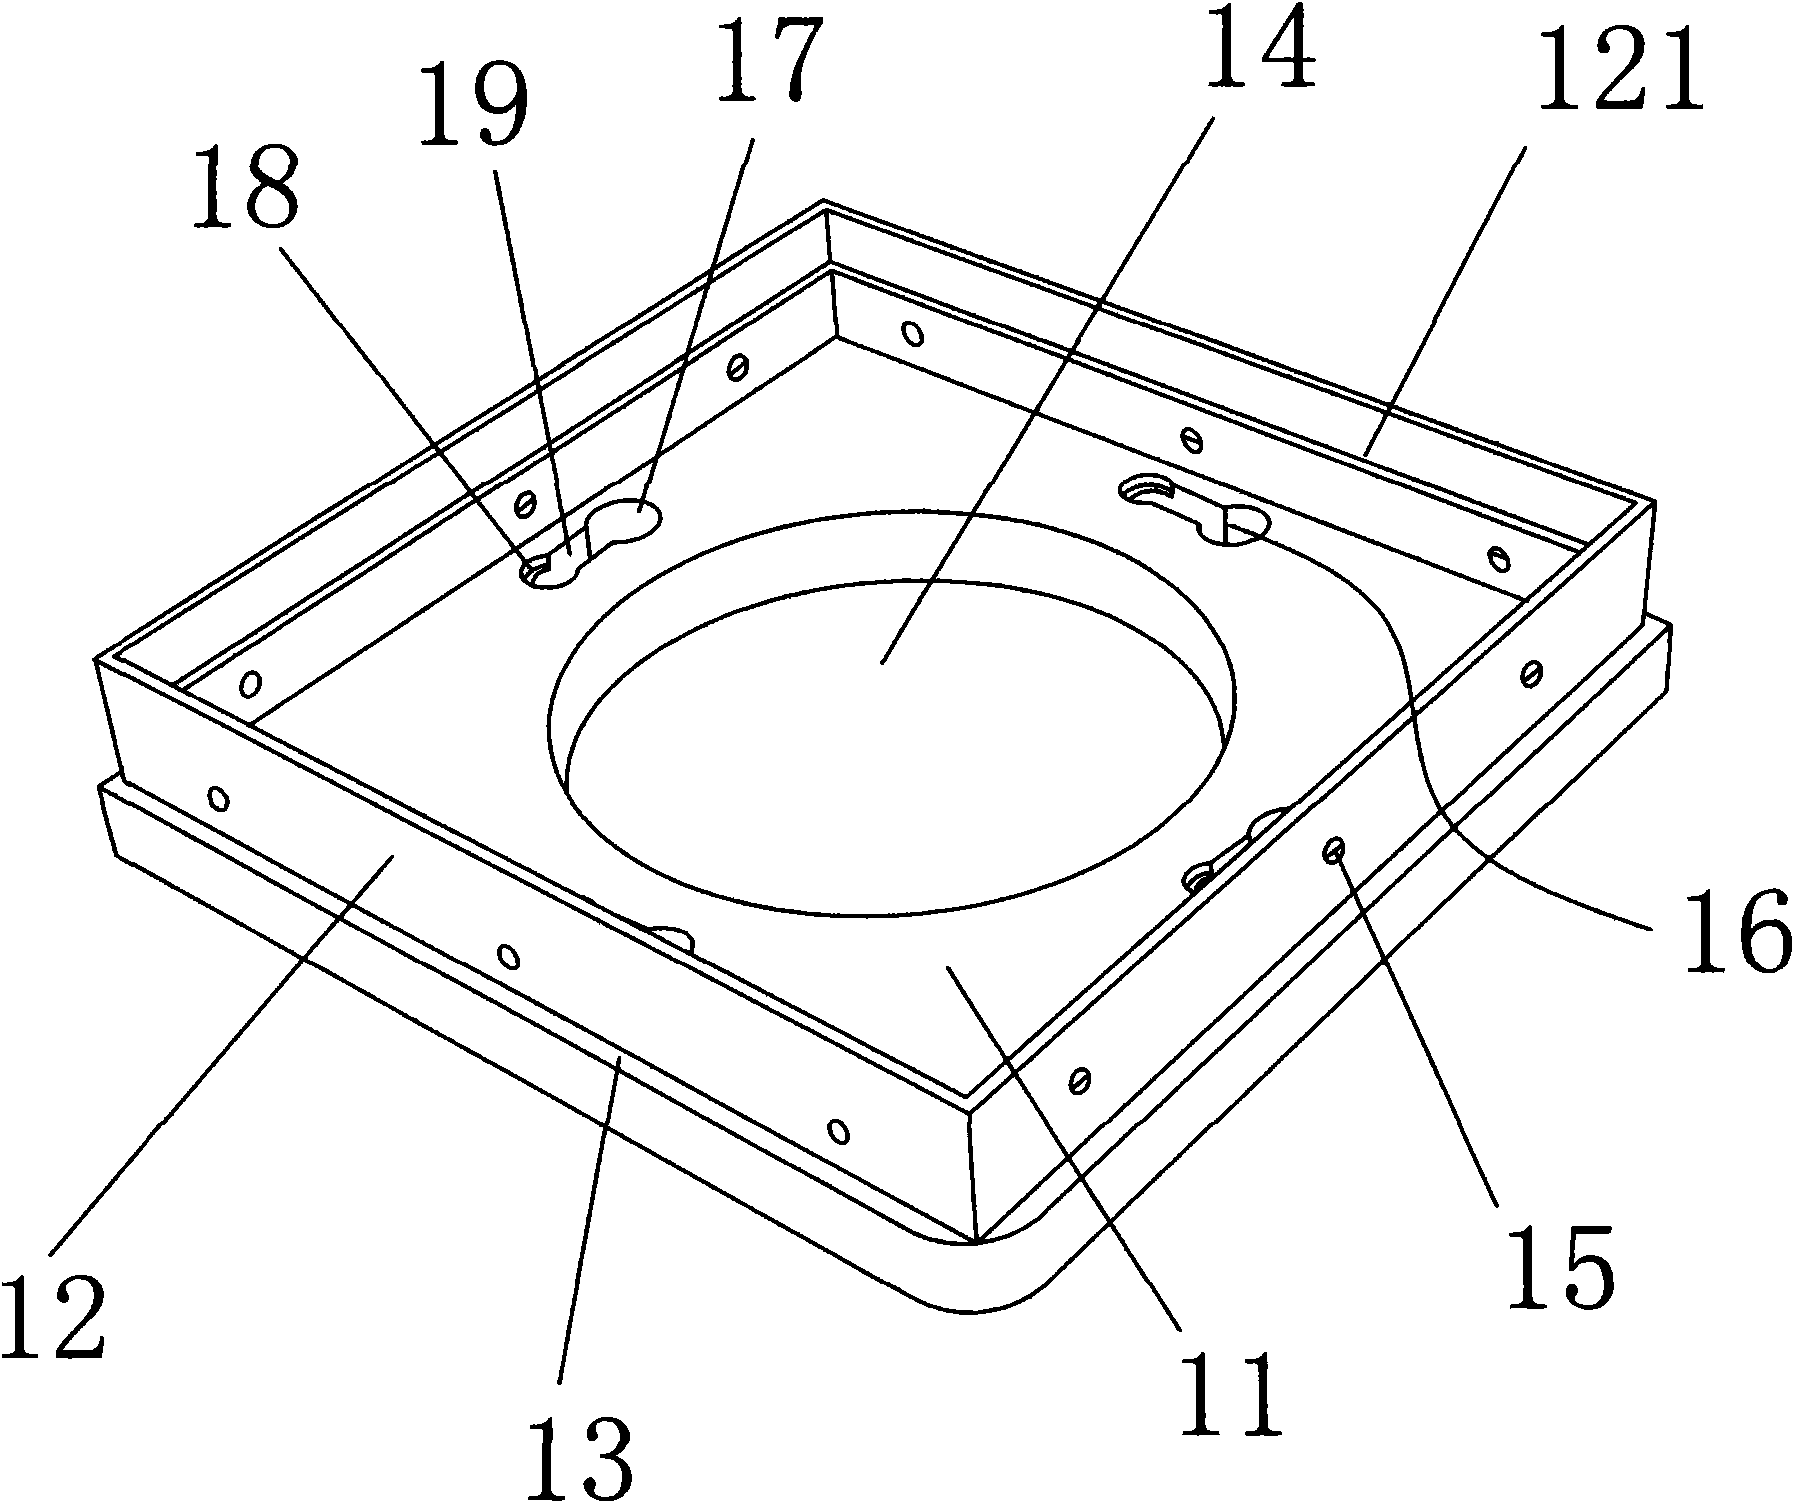 Connection structure used for pull-out resistant pile foundation and connecting method thereof